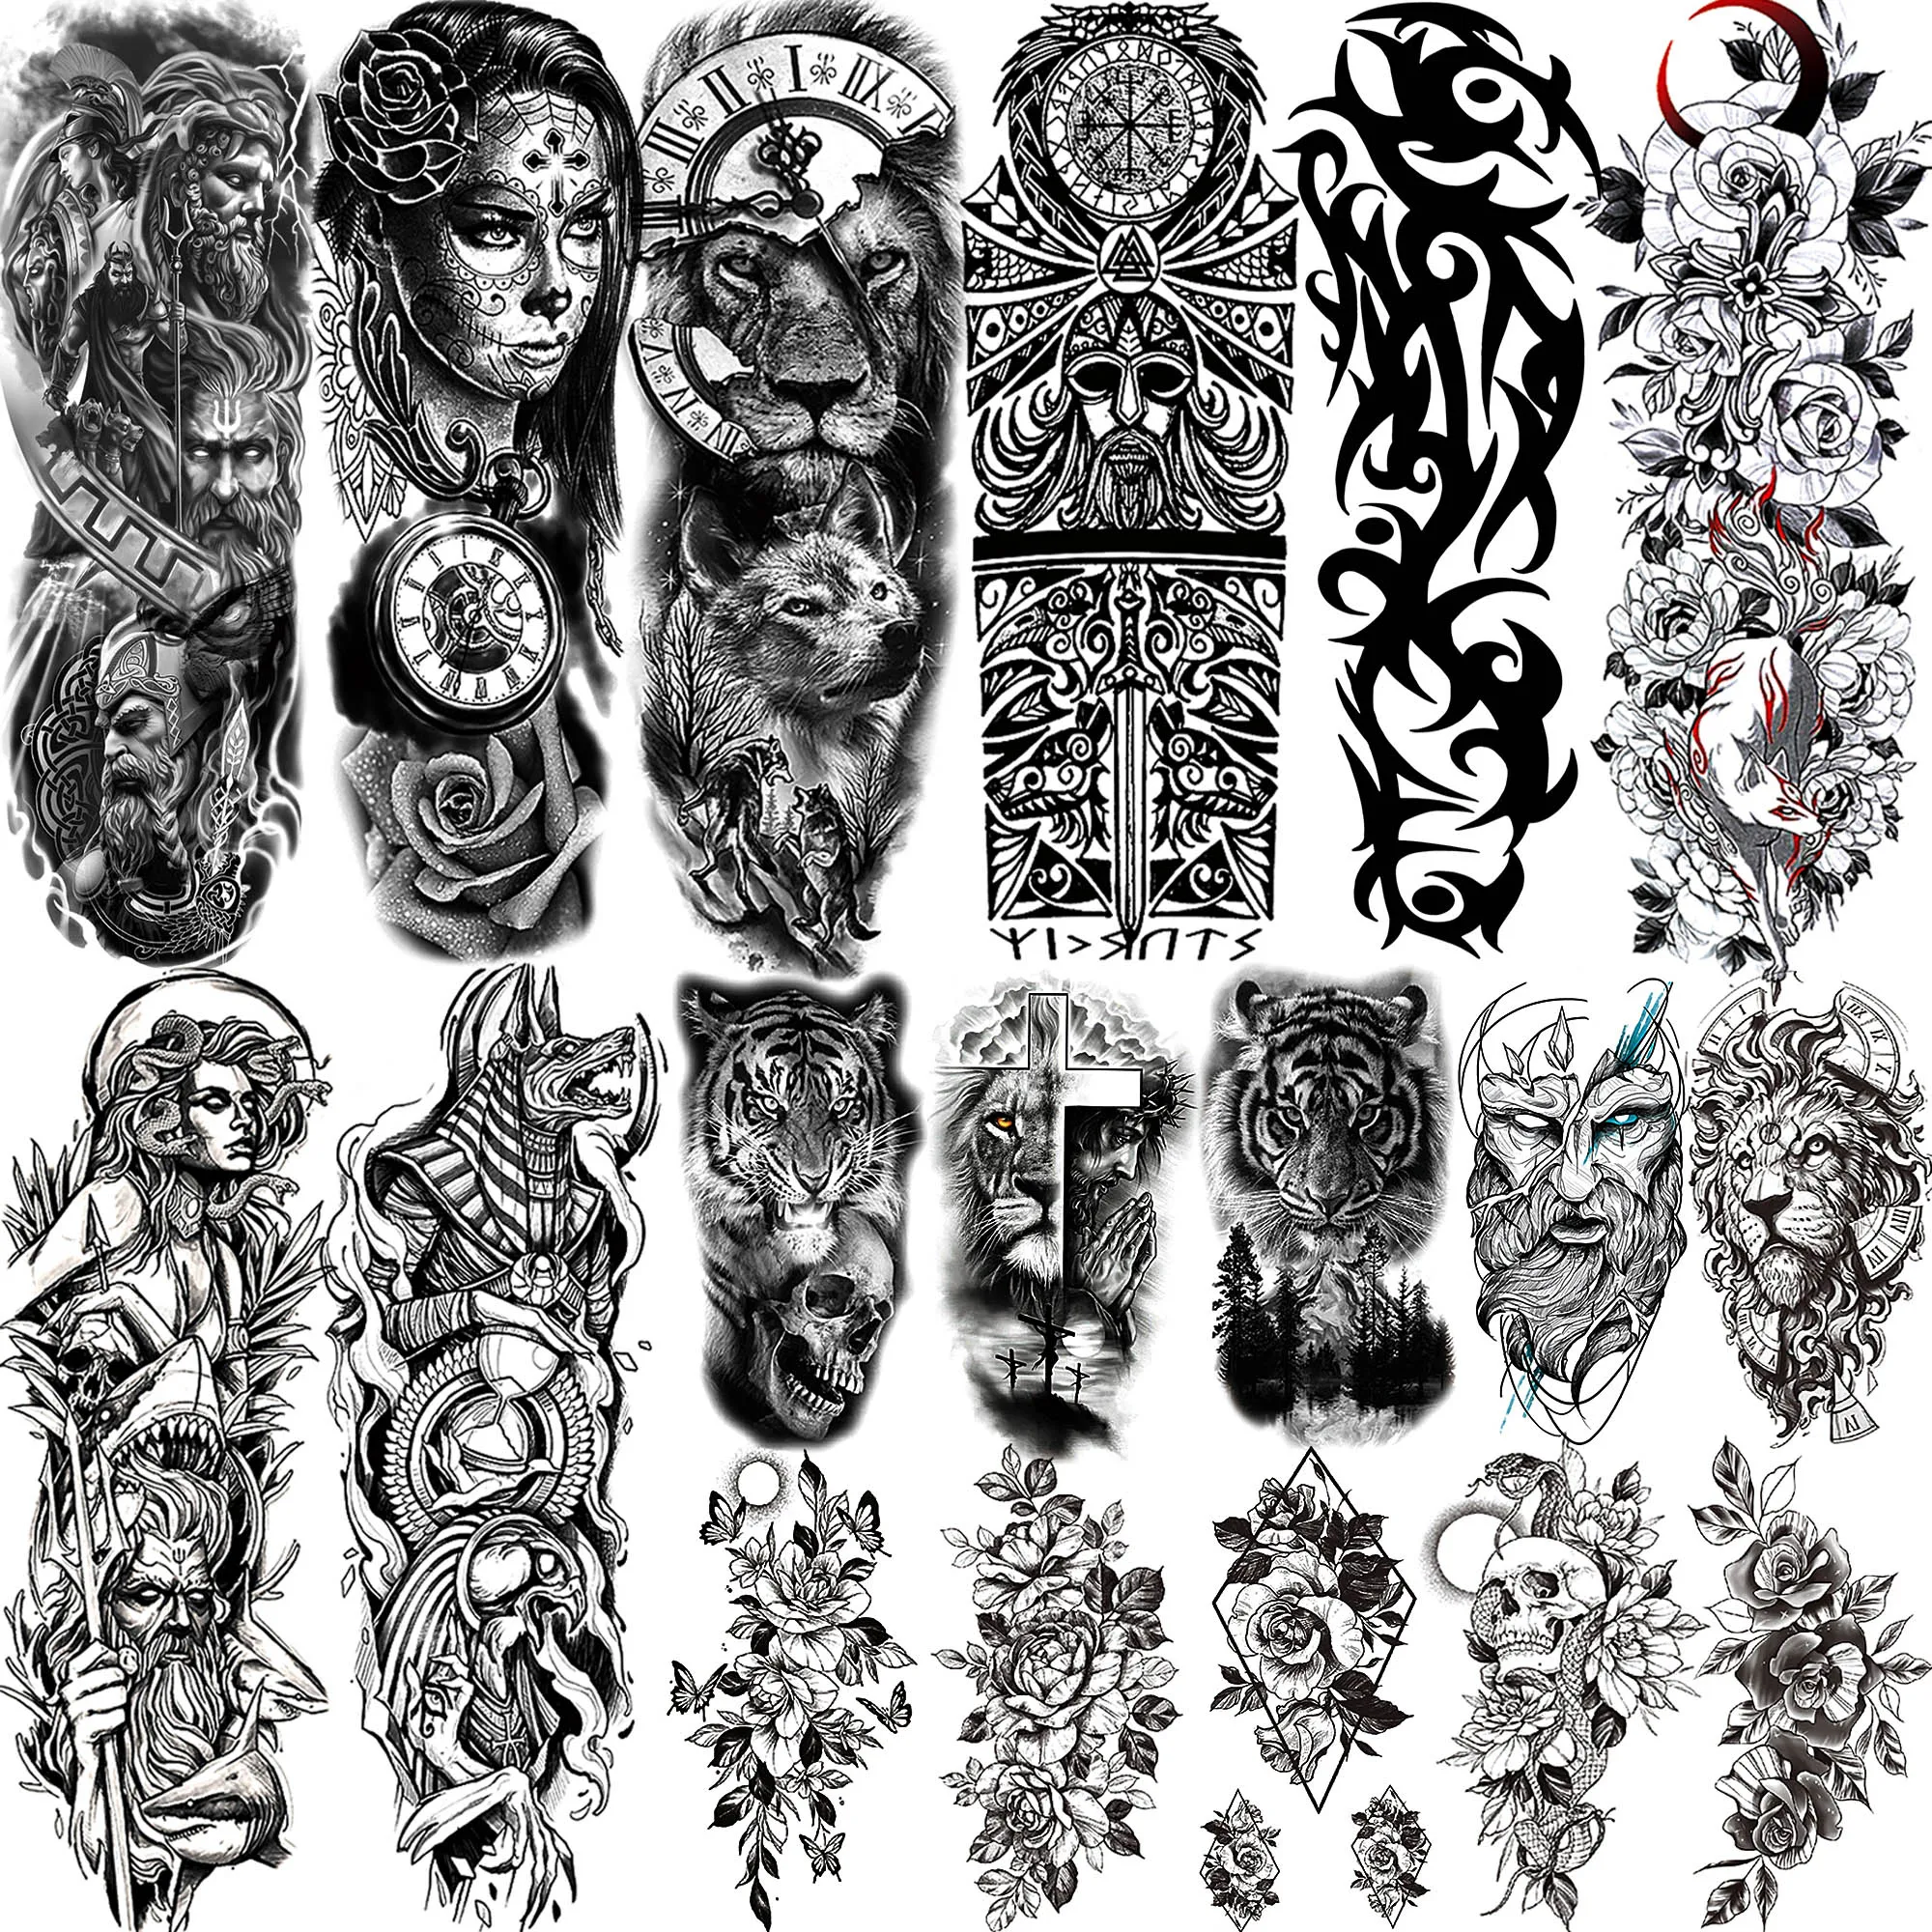 Amazon.com : Cerlaza Half Sleeves Temporary Tattoos for Women, Half Arm  Sleeve Fake Tattoo Stickers for Body Makeup, Large Black Flower Realistic  Temp Tattoos for Girls Adult : Beauty & Personal Care